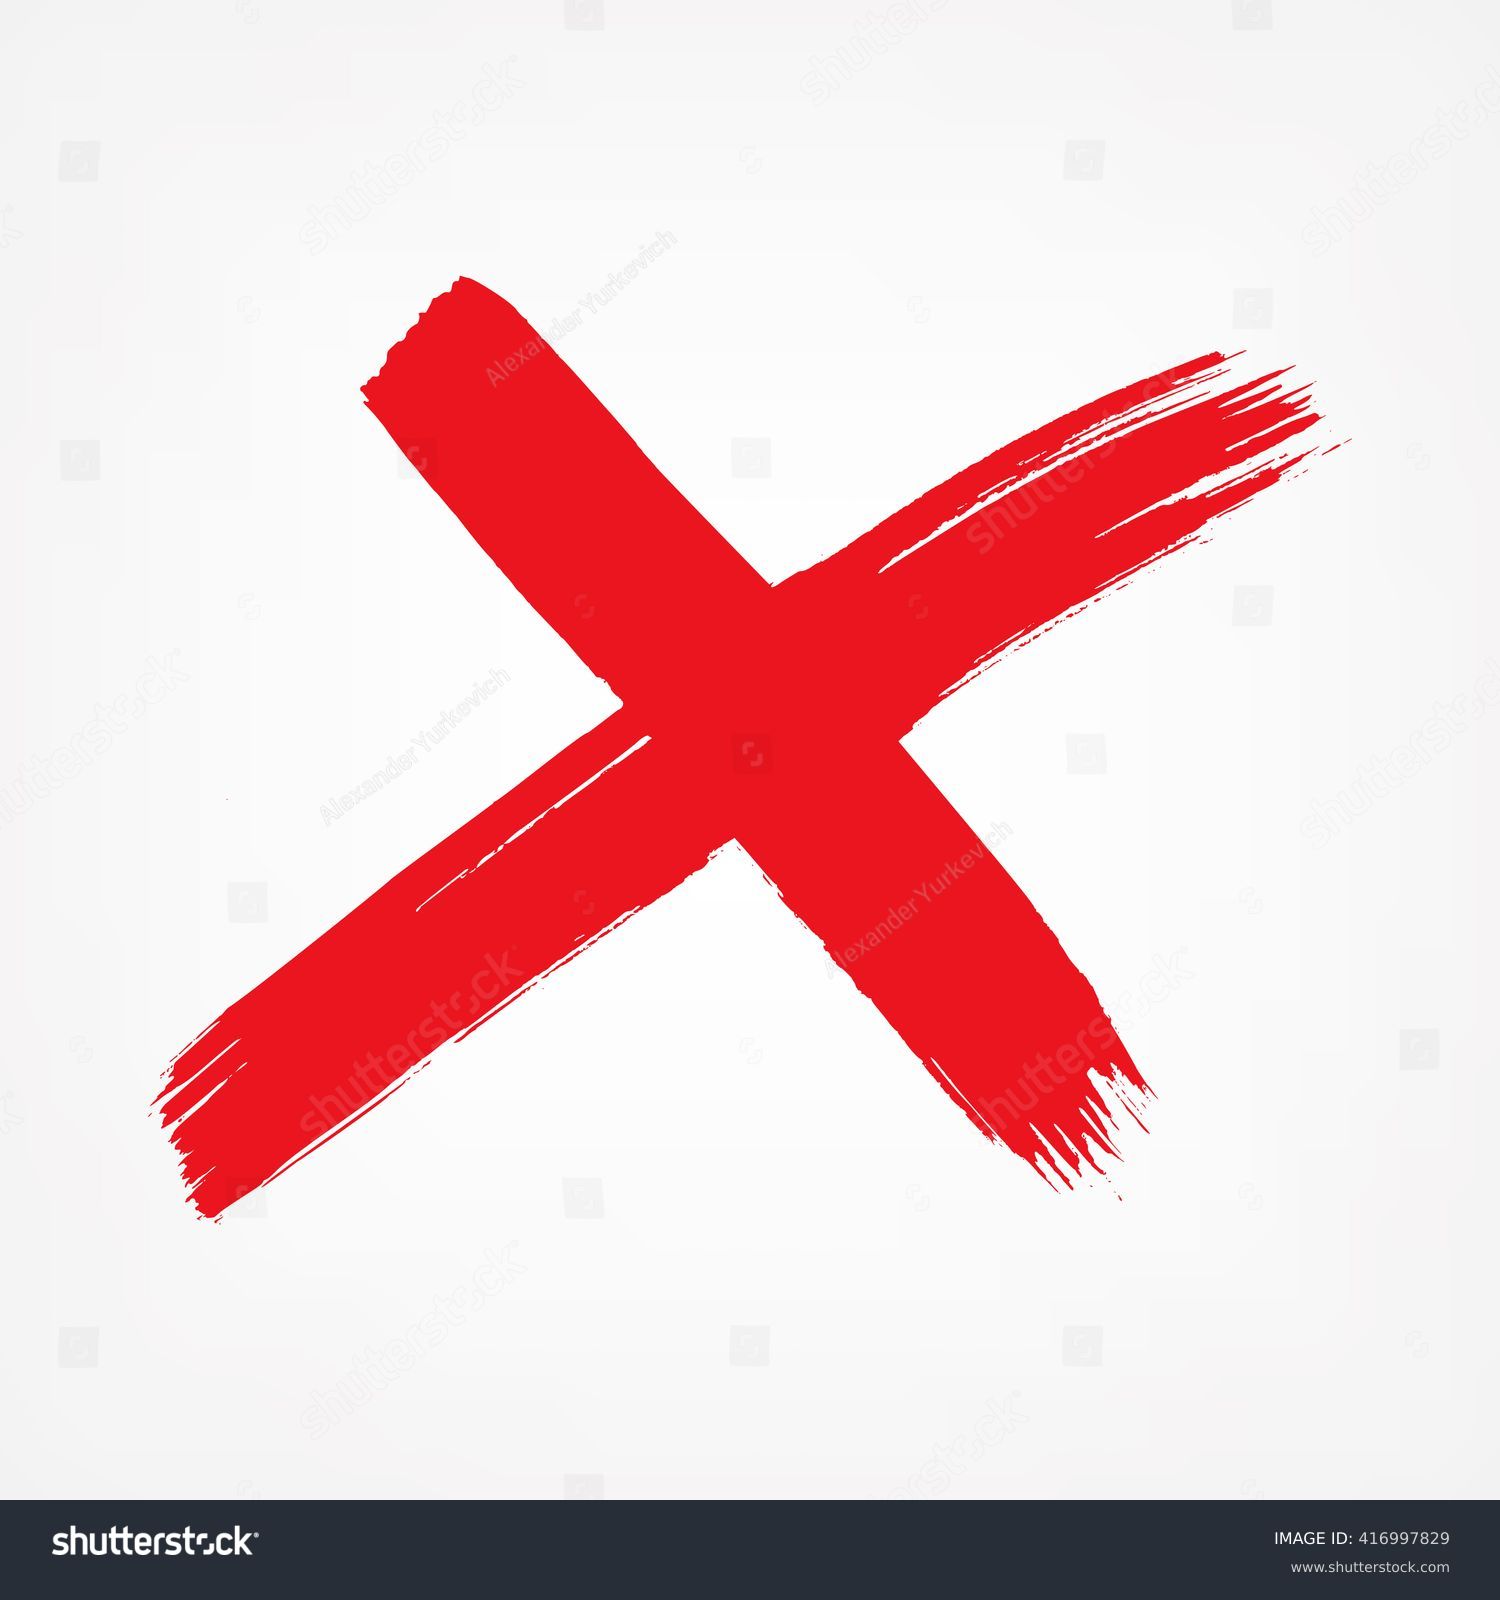 X. Red Letter X made with ink. Mark grunge style. vector #416997829